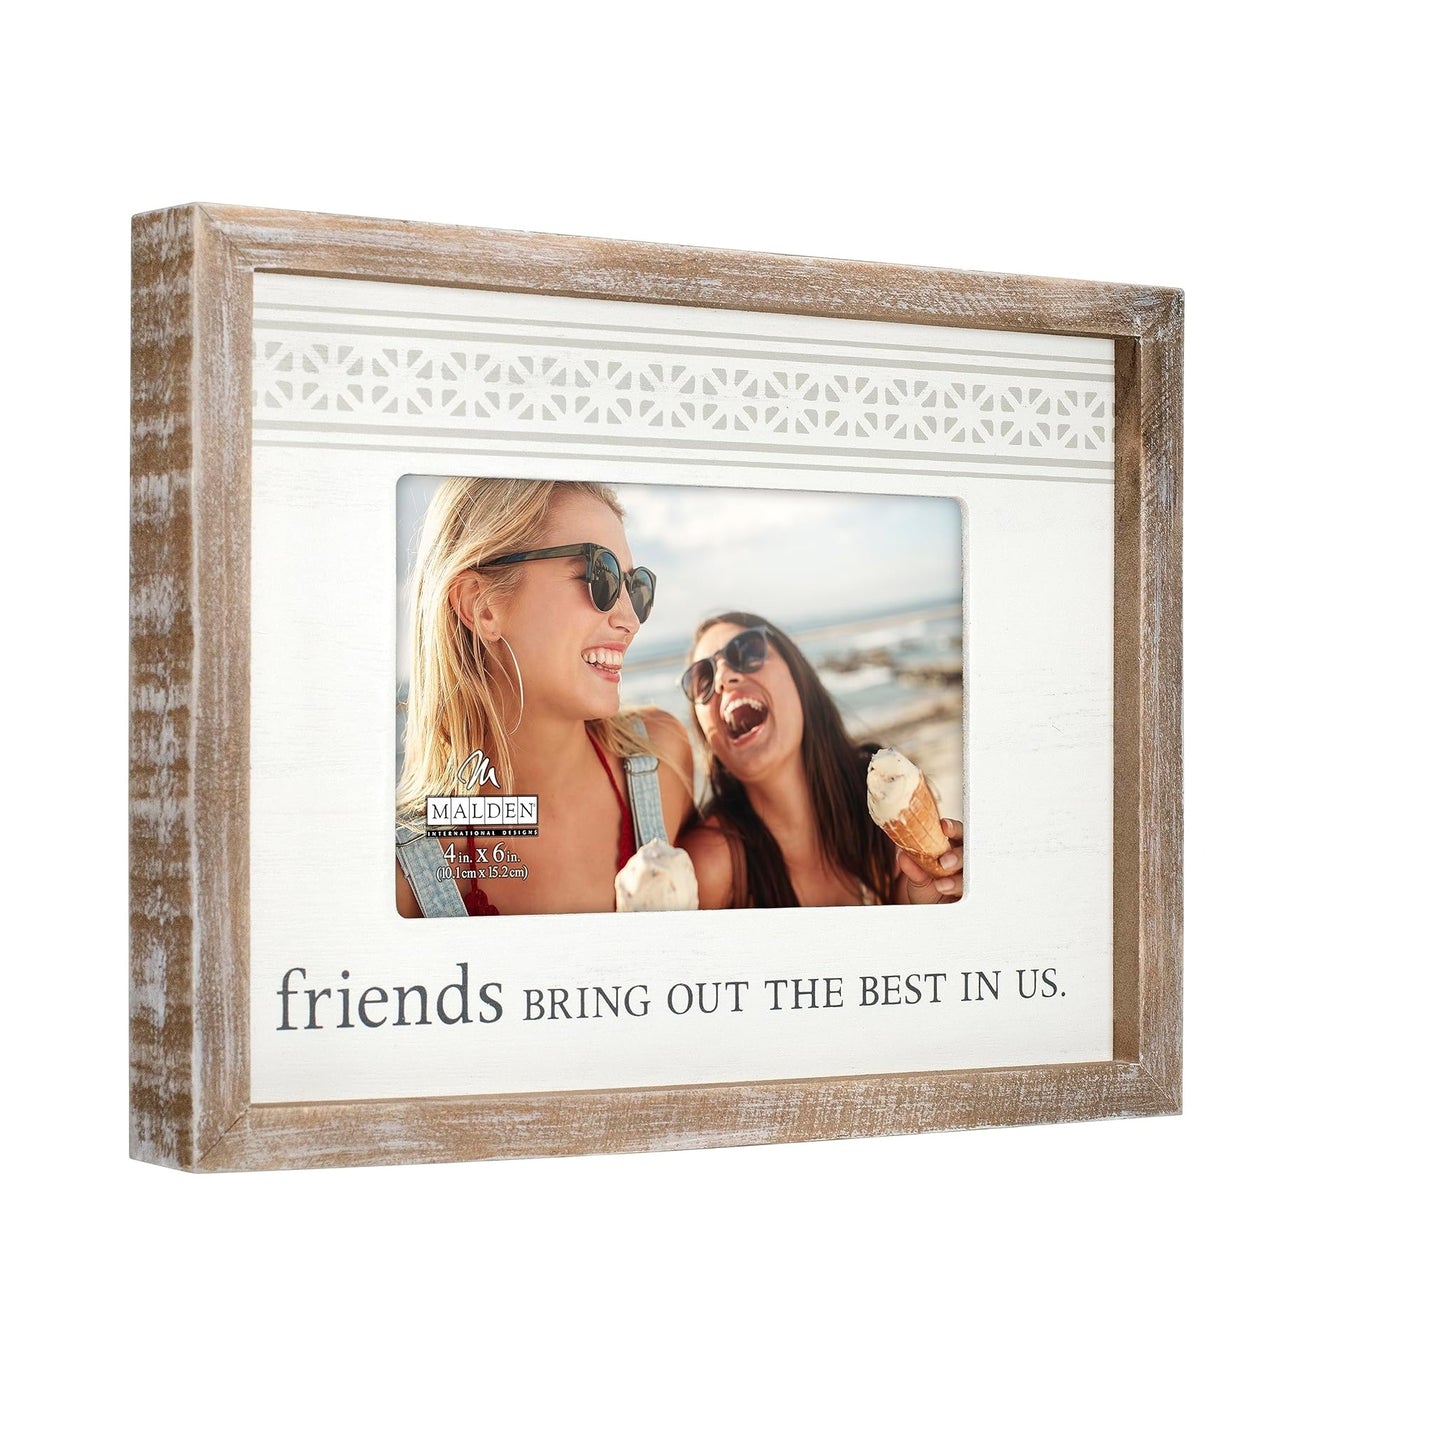 Malden "Friends Bring Out The Best In Us" Rustic Border Photo Frame